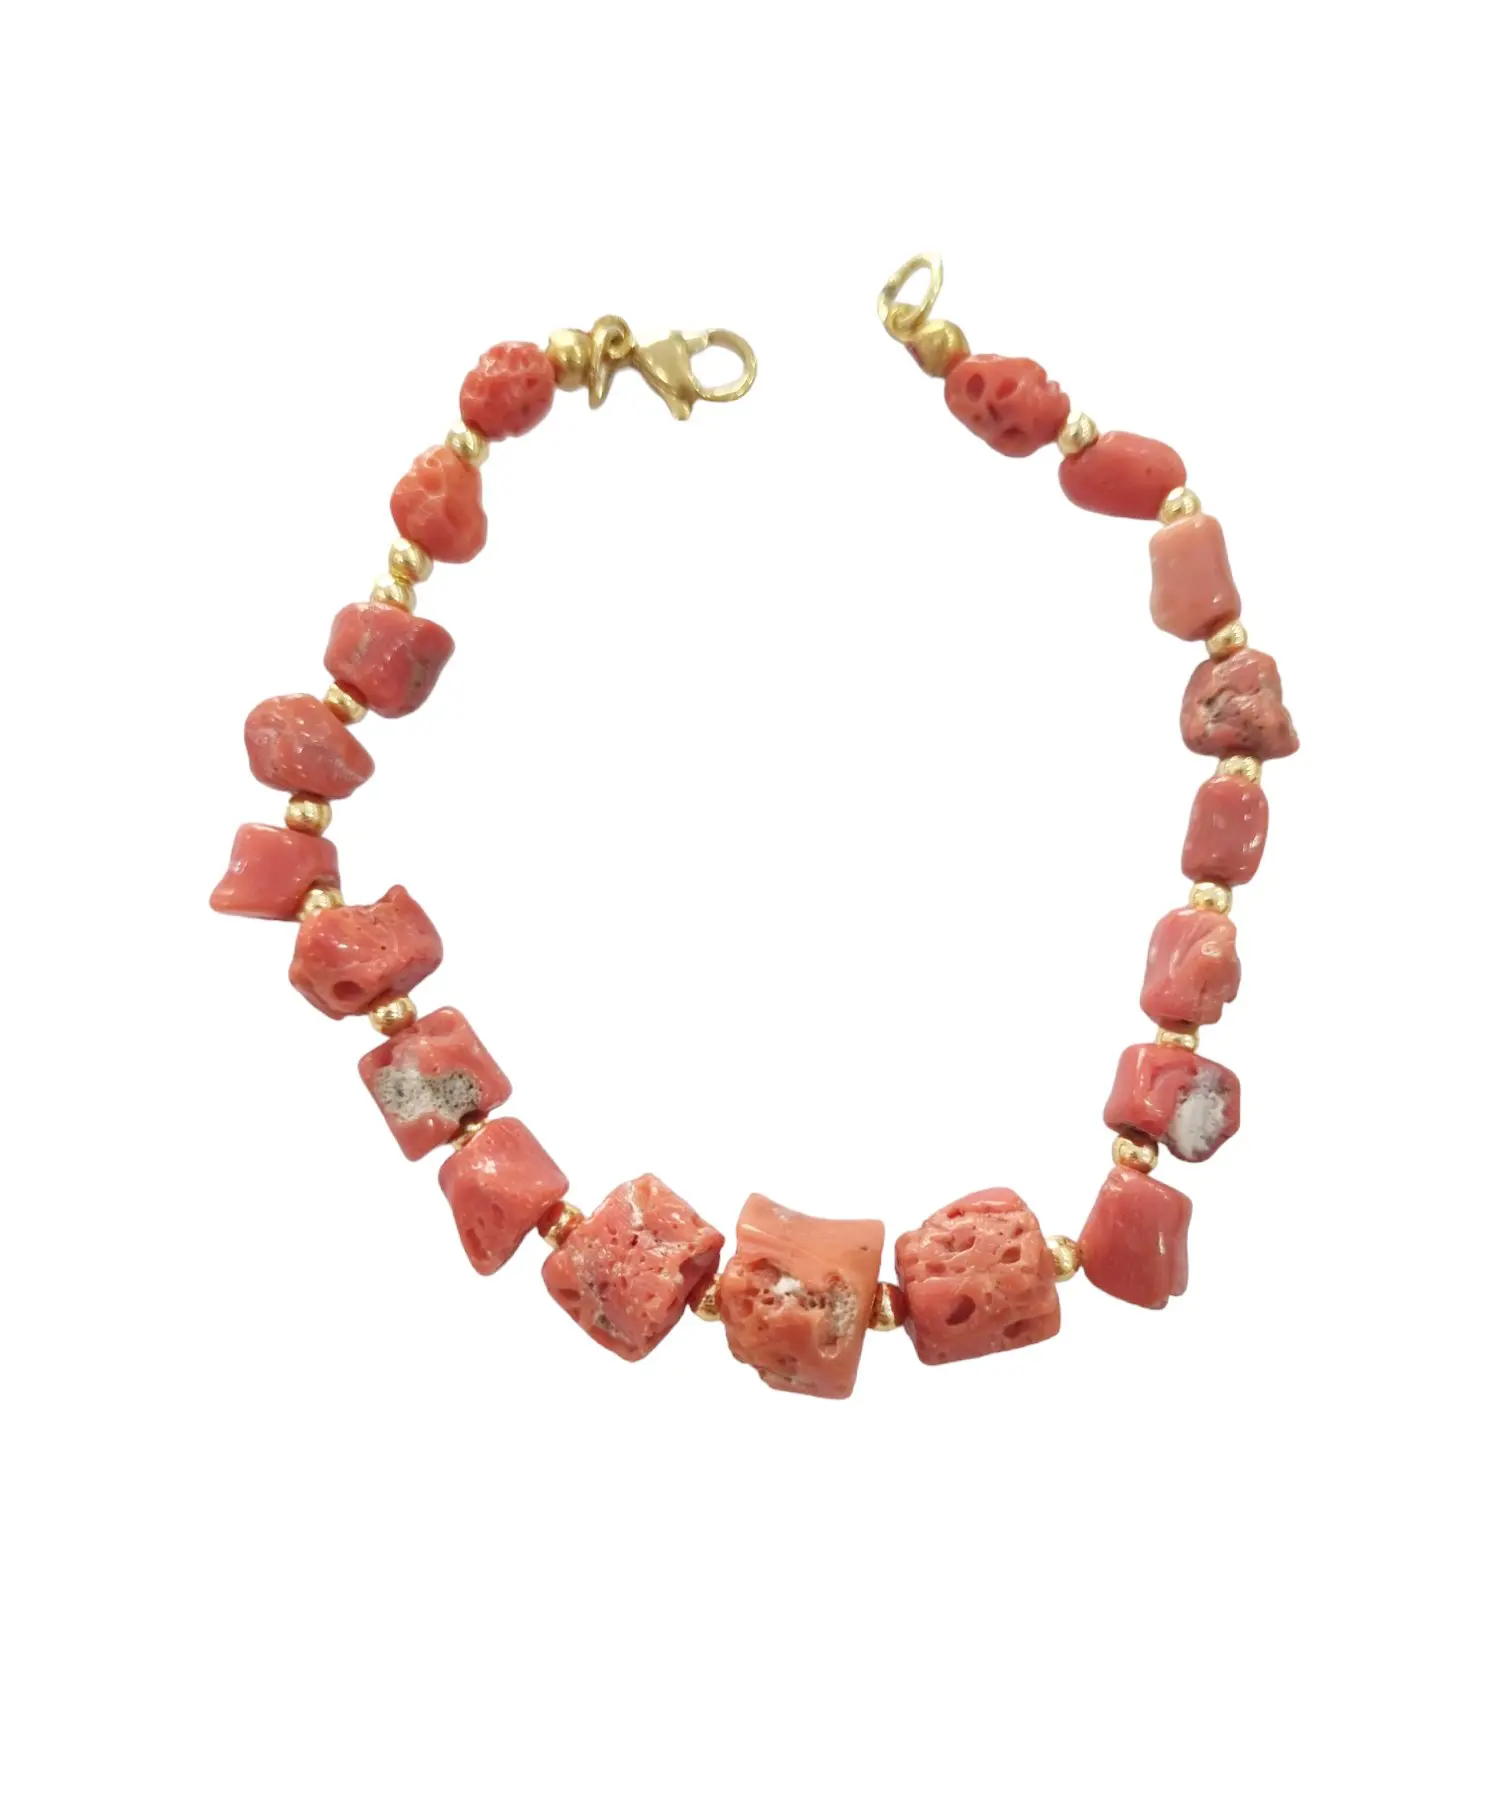 Coral and Hematite Bracelet with Steel Clasp – Length 20cm